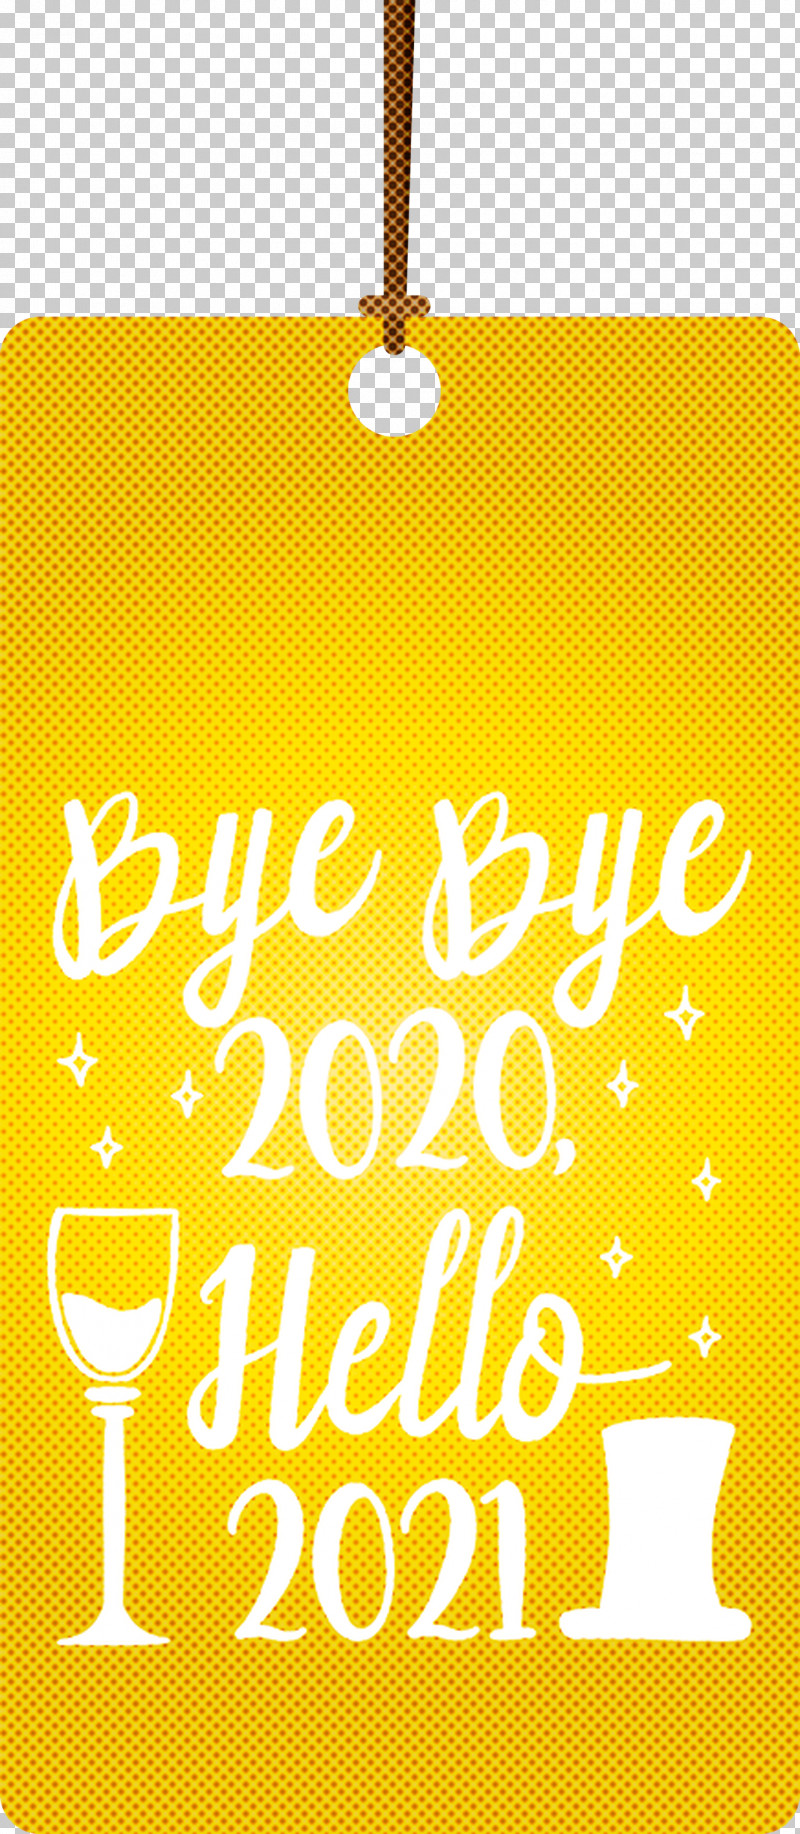 2021 Happy New Year 2021 Happy New Year Tag 2021 New Year PNG, Clipart, 2021 Happy New Year, 2021 Happy New Year Tag, 2021 New Year, Geometry, Line Free PNG Download